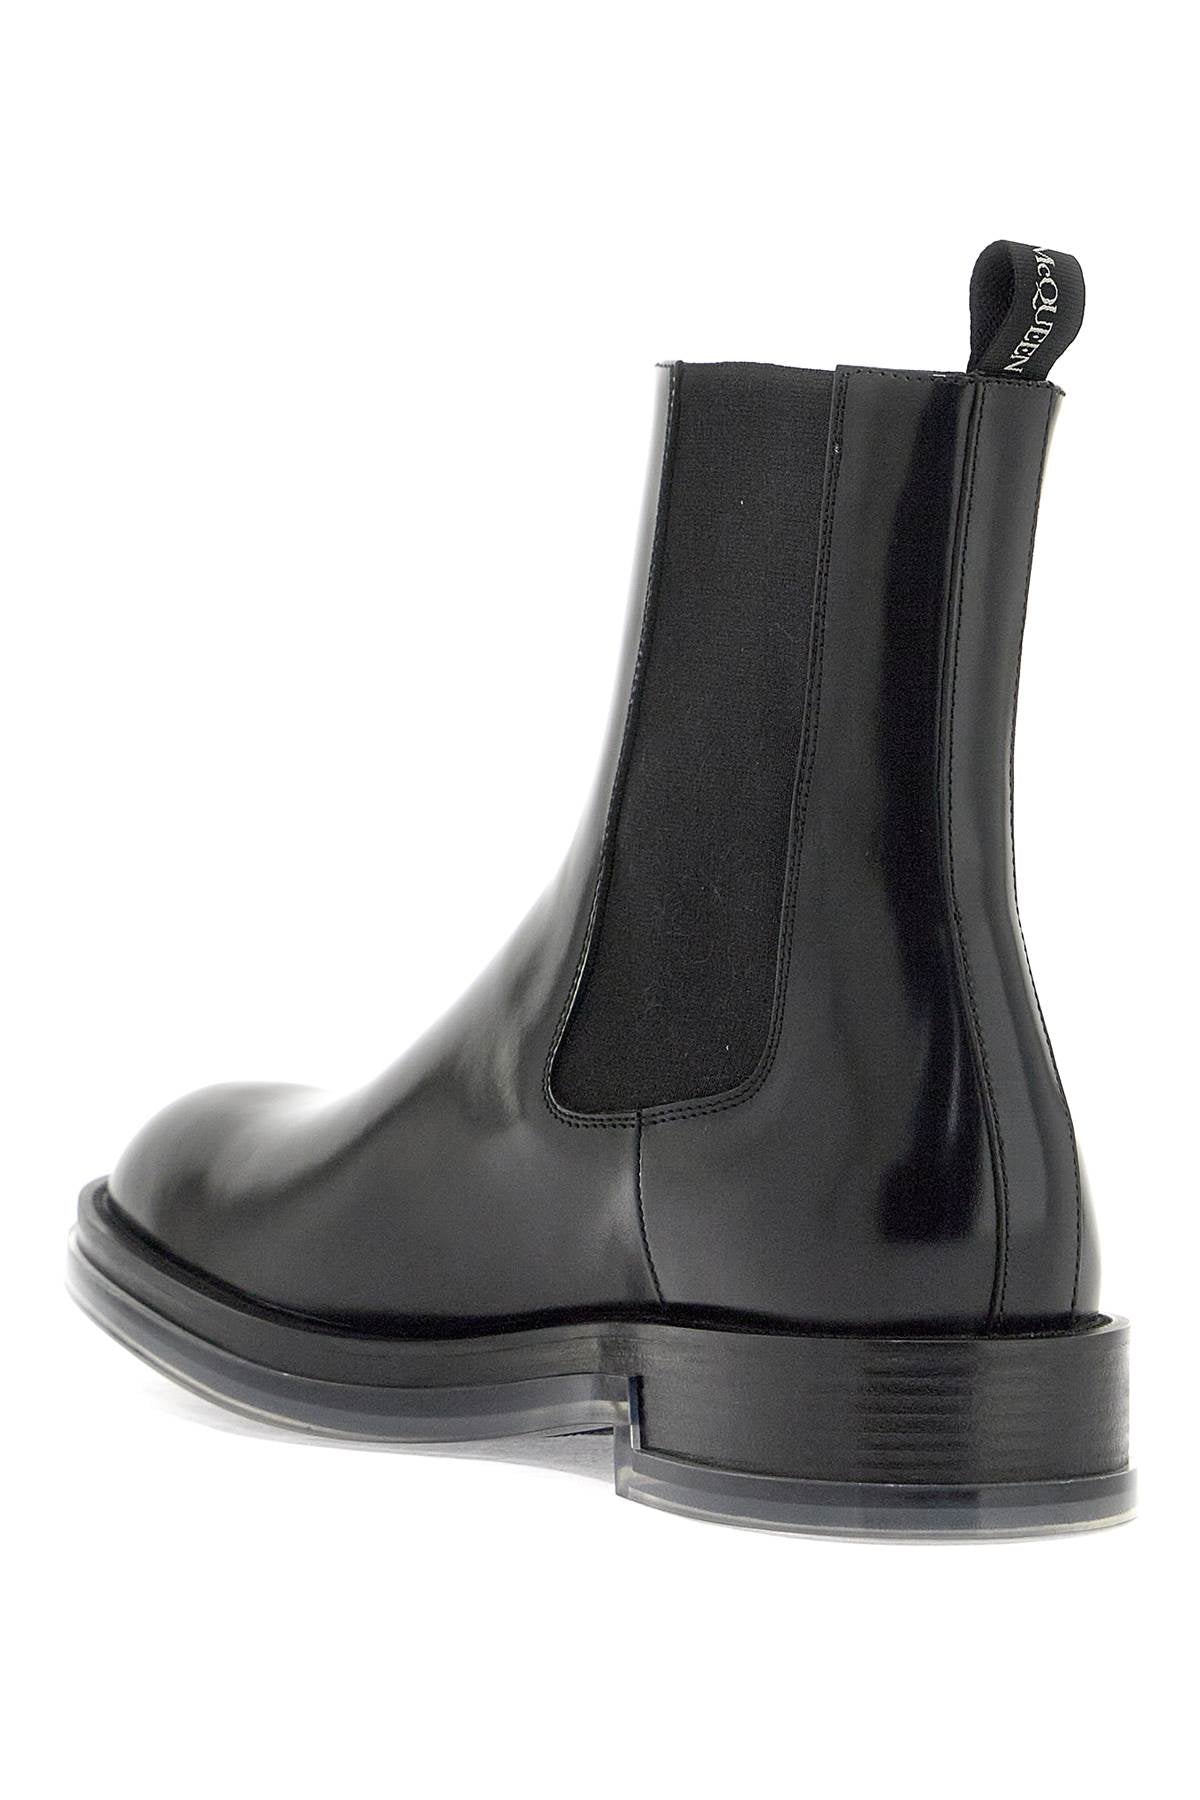 ALEXANDER MCQUEEN Men's Chelsea Float Ankle Boots - Glossy Black Leather, Transparent Sole